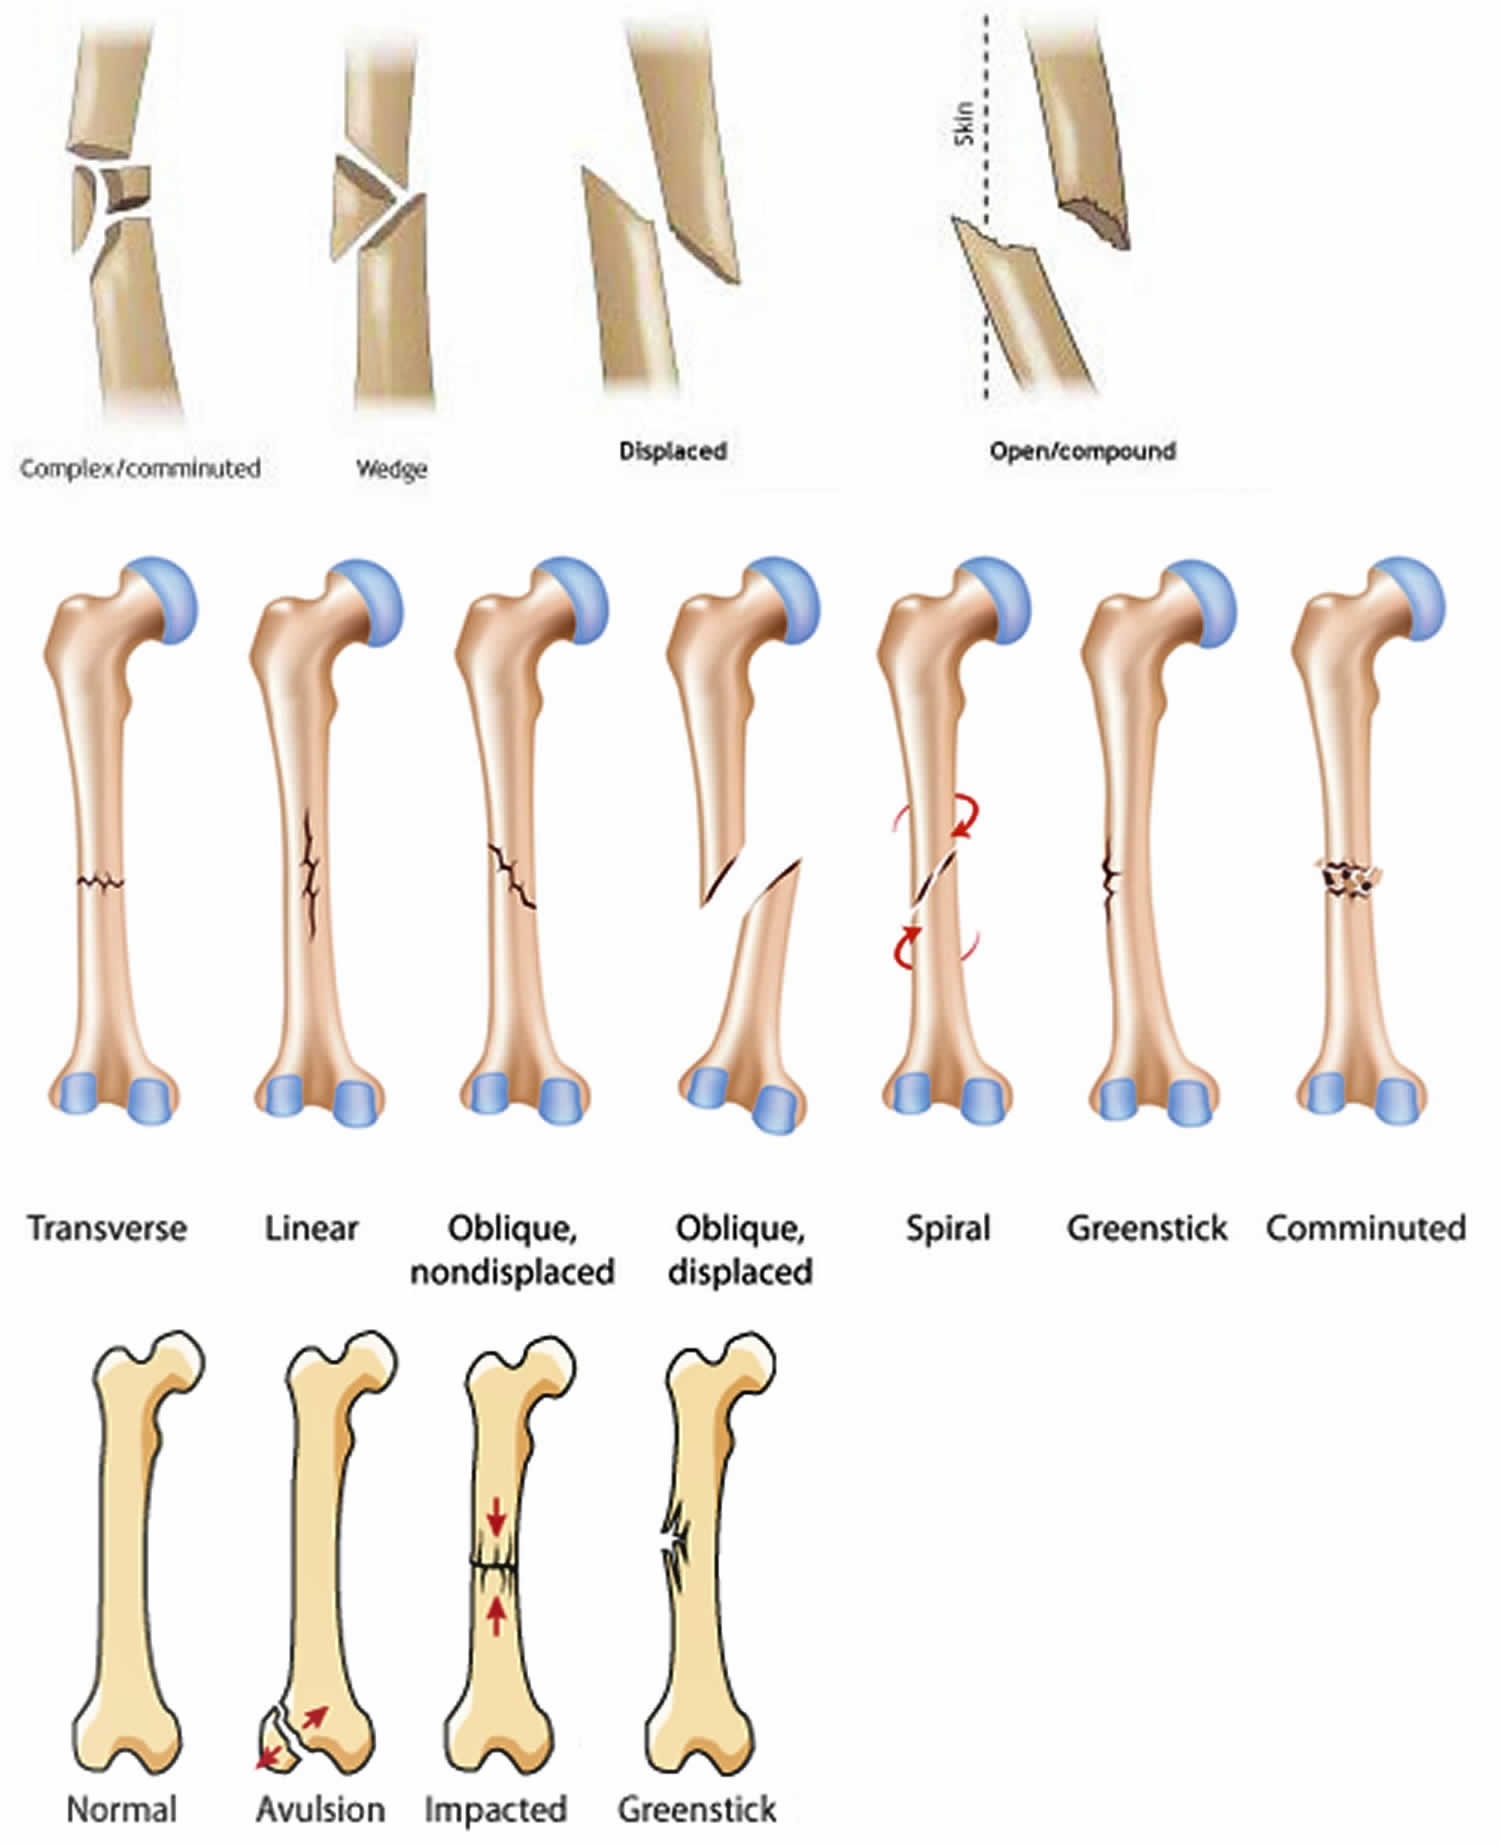 Broken Femur Types Causes Treatment Recovery Time Complications